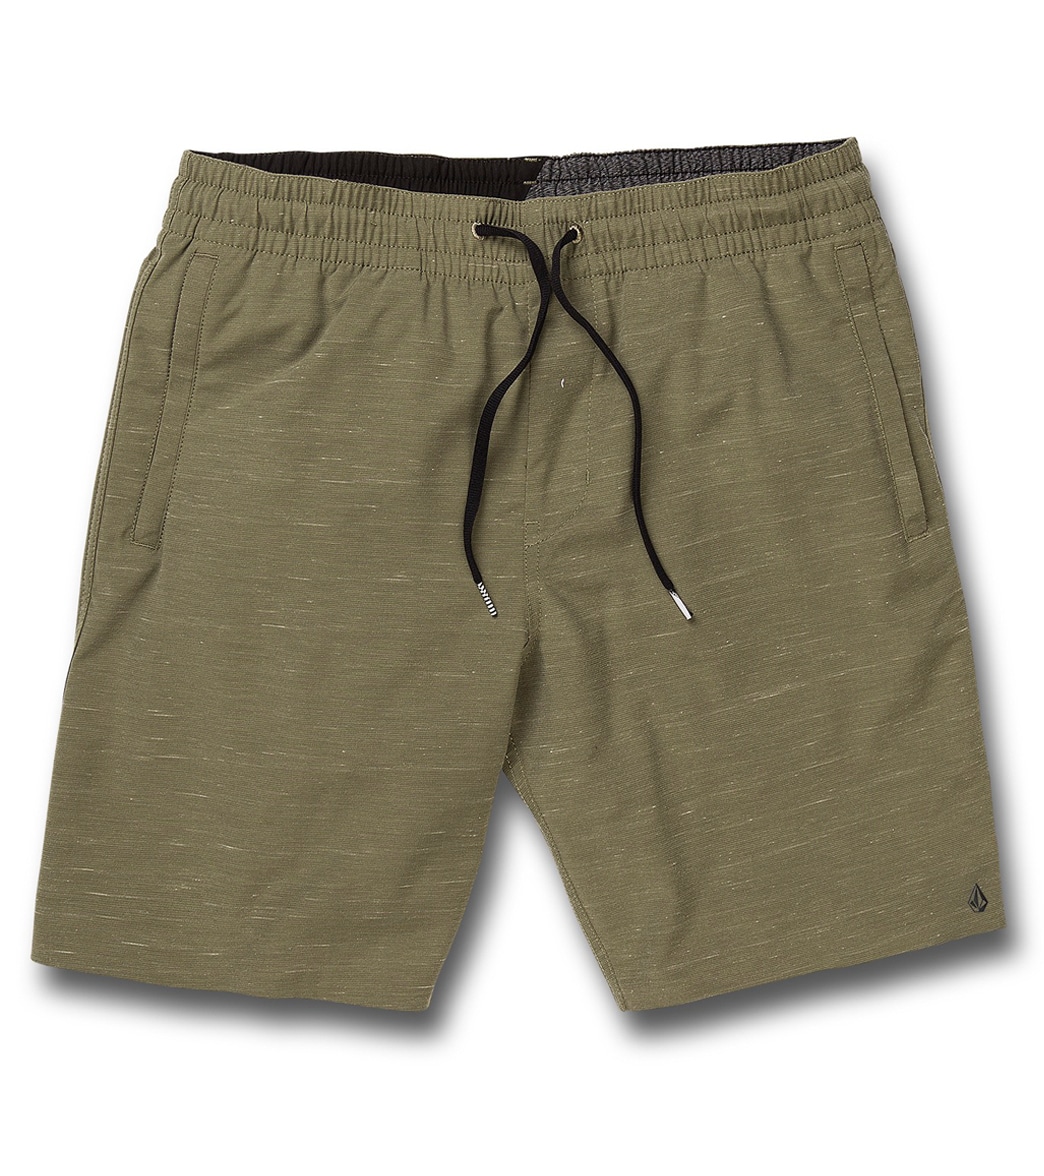 Volcom Men's Packasack Lite 19 Shorts - Military Large Cotton/Polyester - Swimoutlet.com